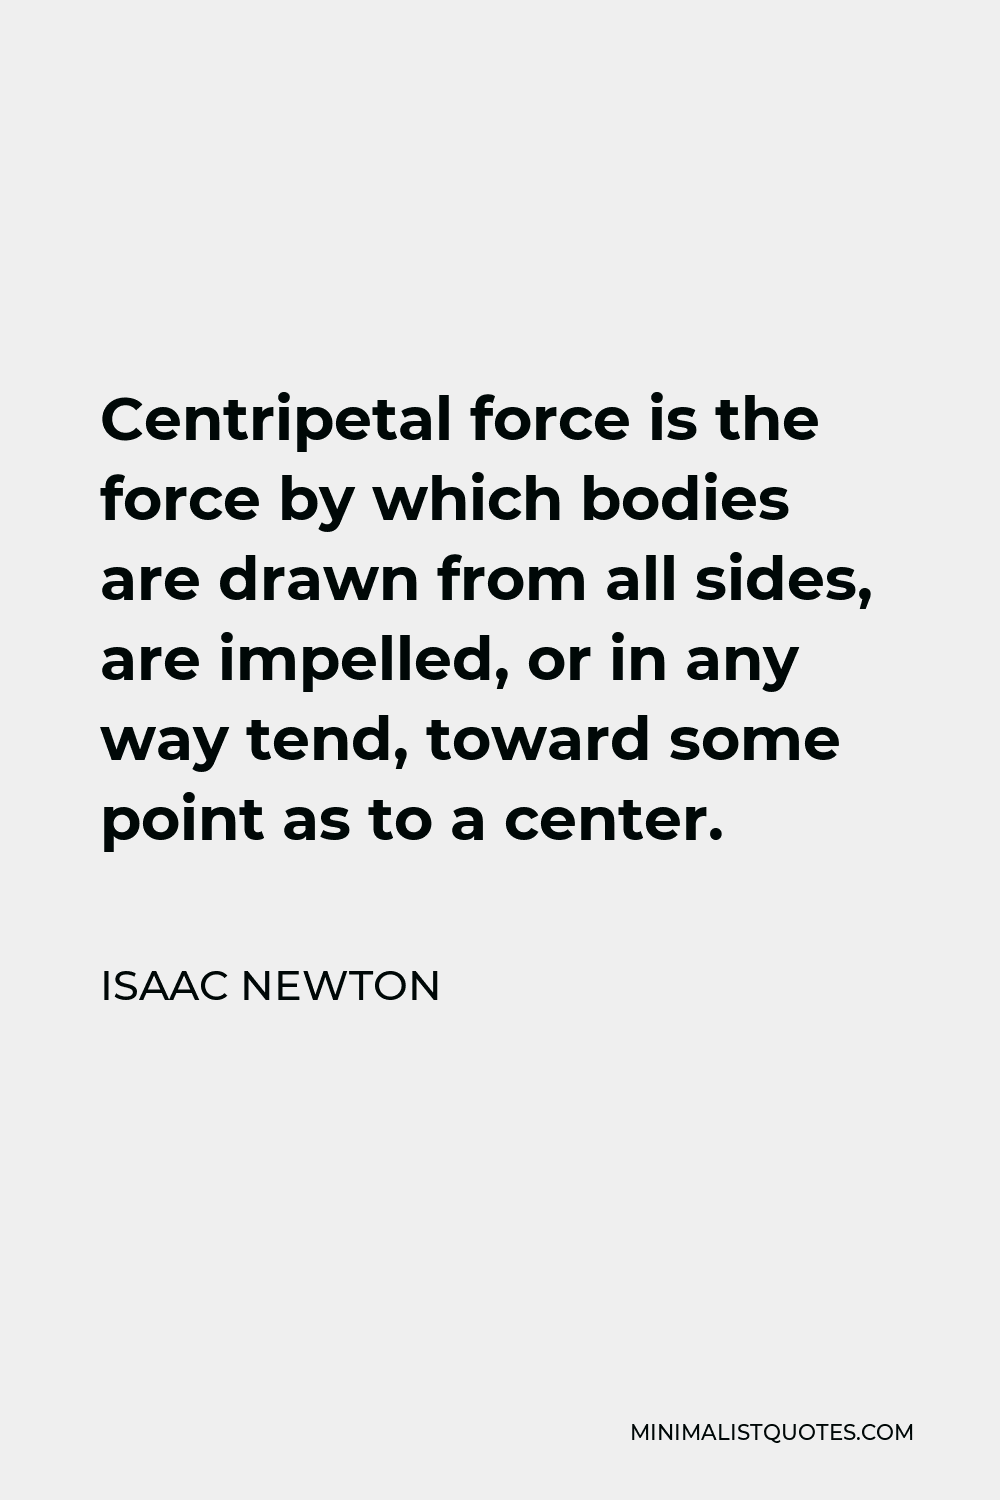 Isaac Newton Quote - Centripetal force is the force by which bodies are drawn from all sides, are impelled, or in any way tend, toward some point as to a center.